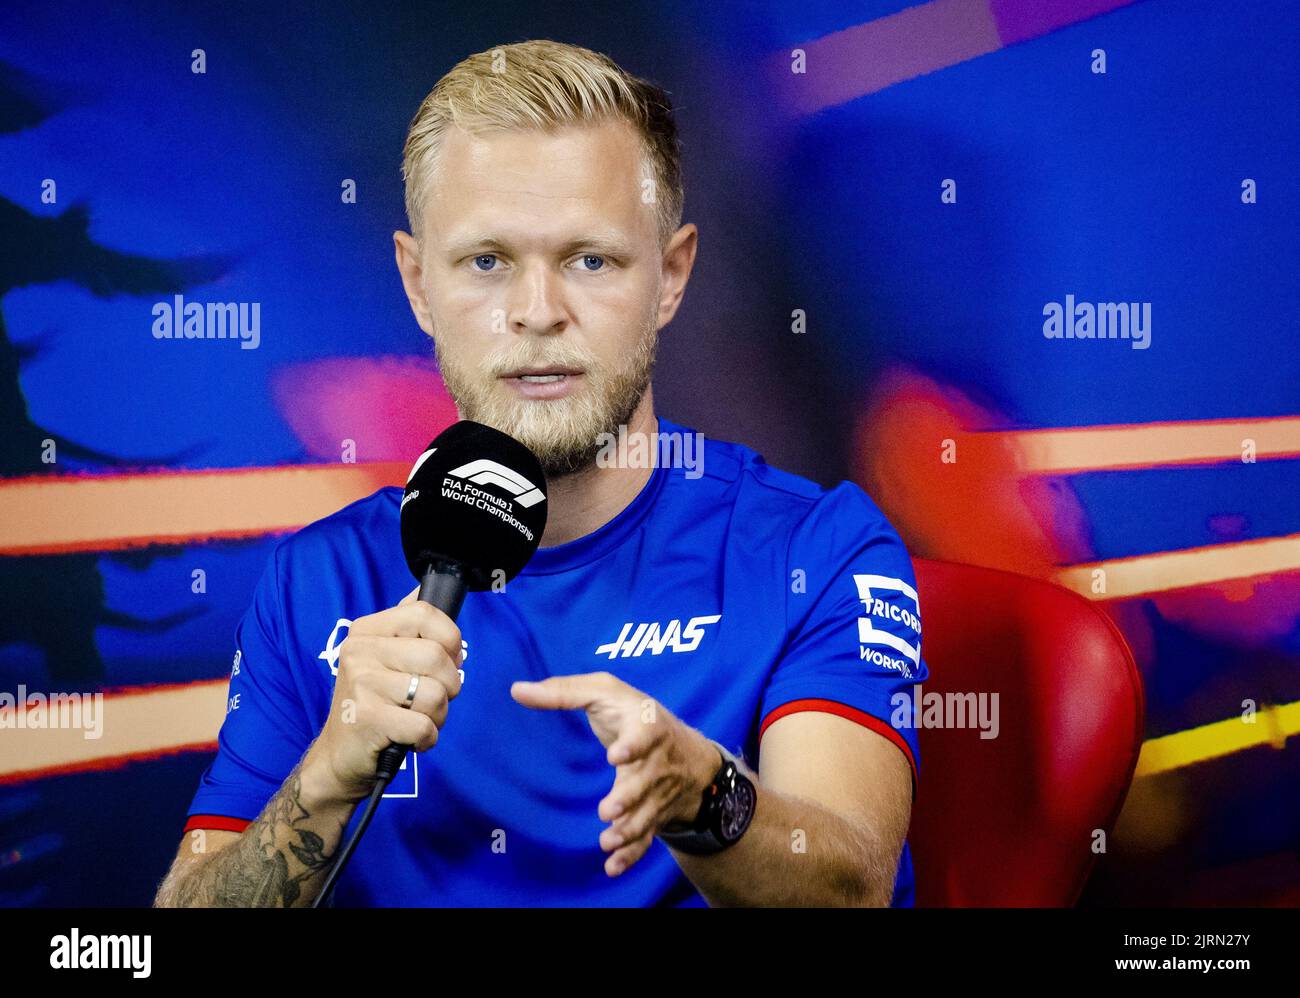 2022-08-25 15:10:25 SPA - Kevin Magnussen (Haas F1 Team) during a press conference at the Spa-Francrochamps race track in the run-up to the Belgian Grand Prix. ANP SEM VAN DER WAL netherlands out - belgium out Stock Photo